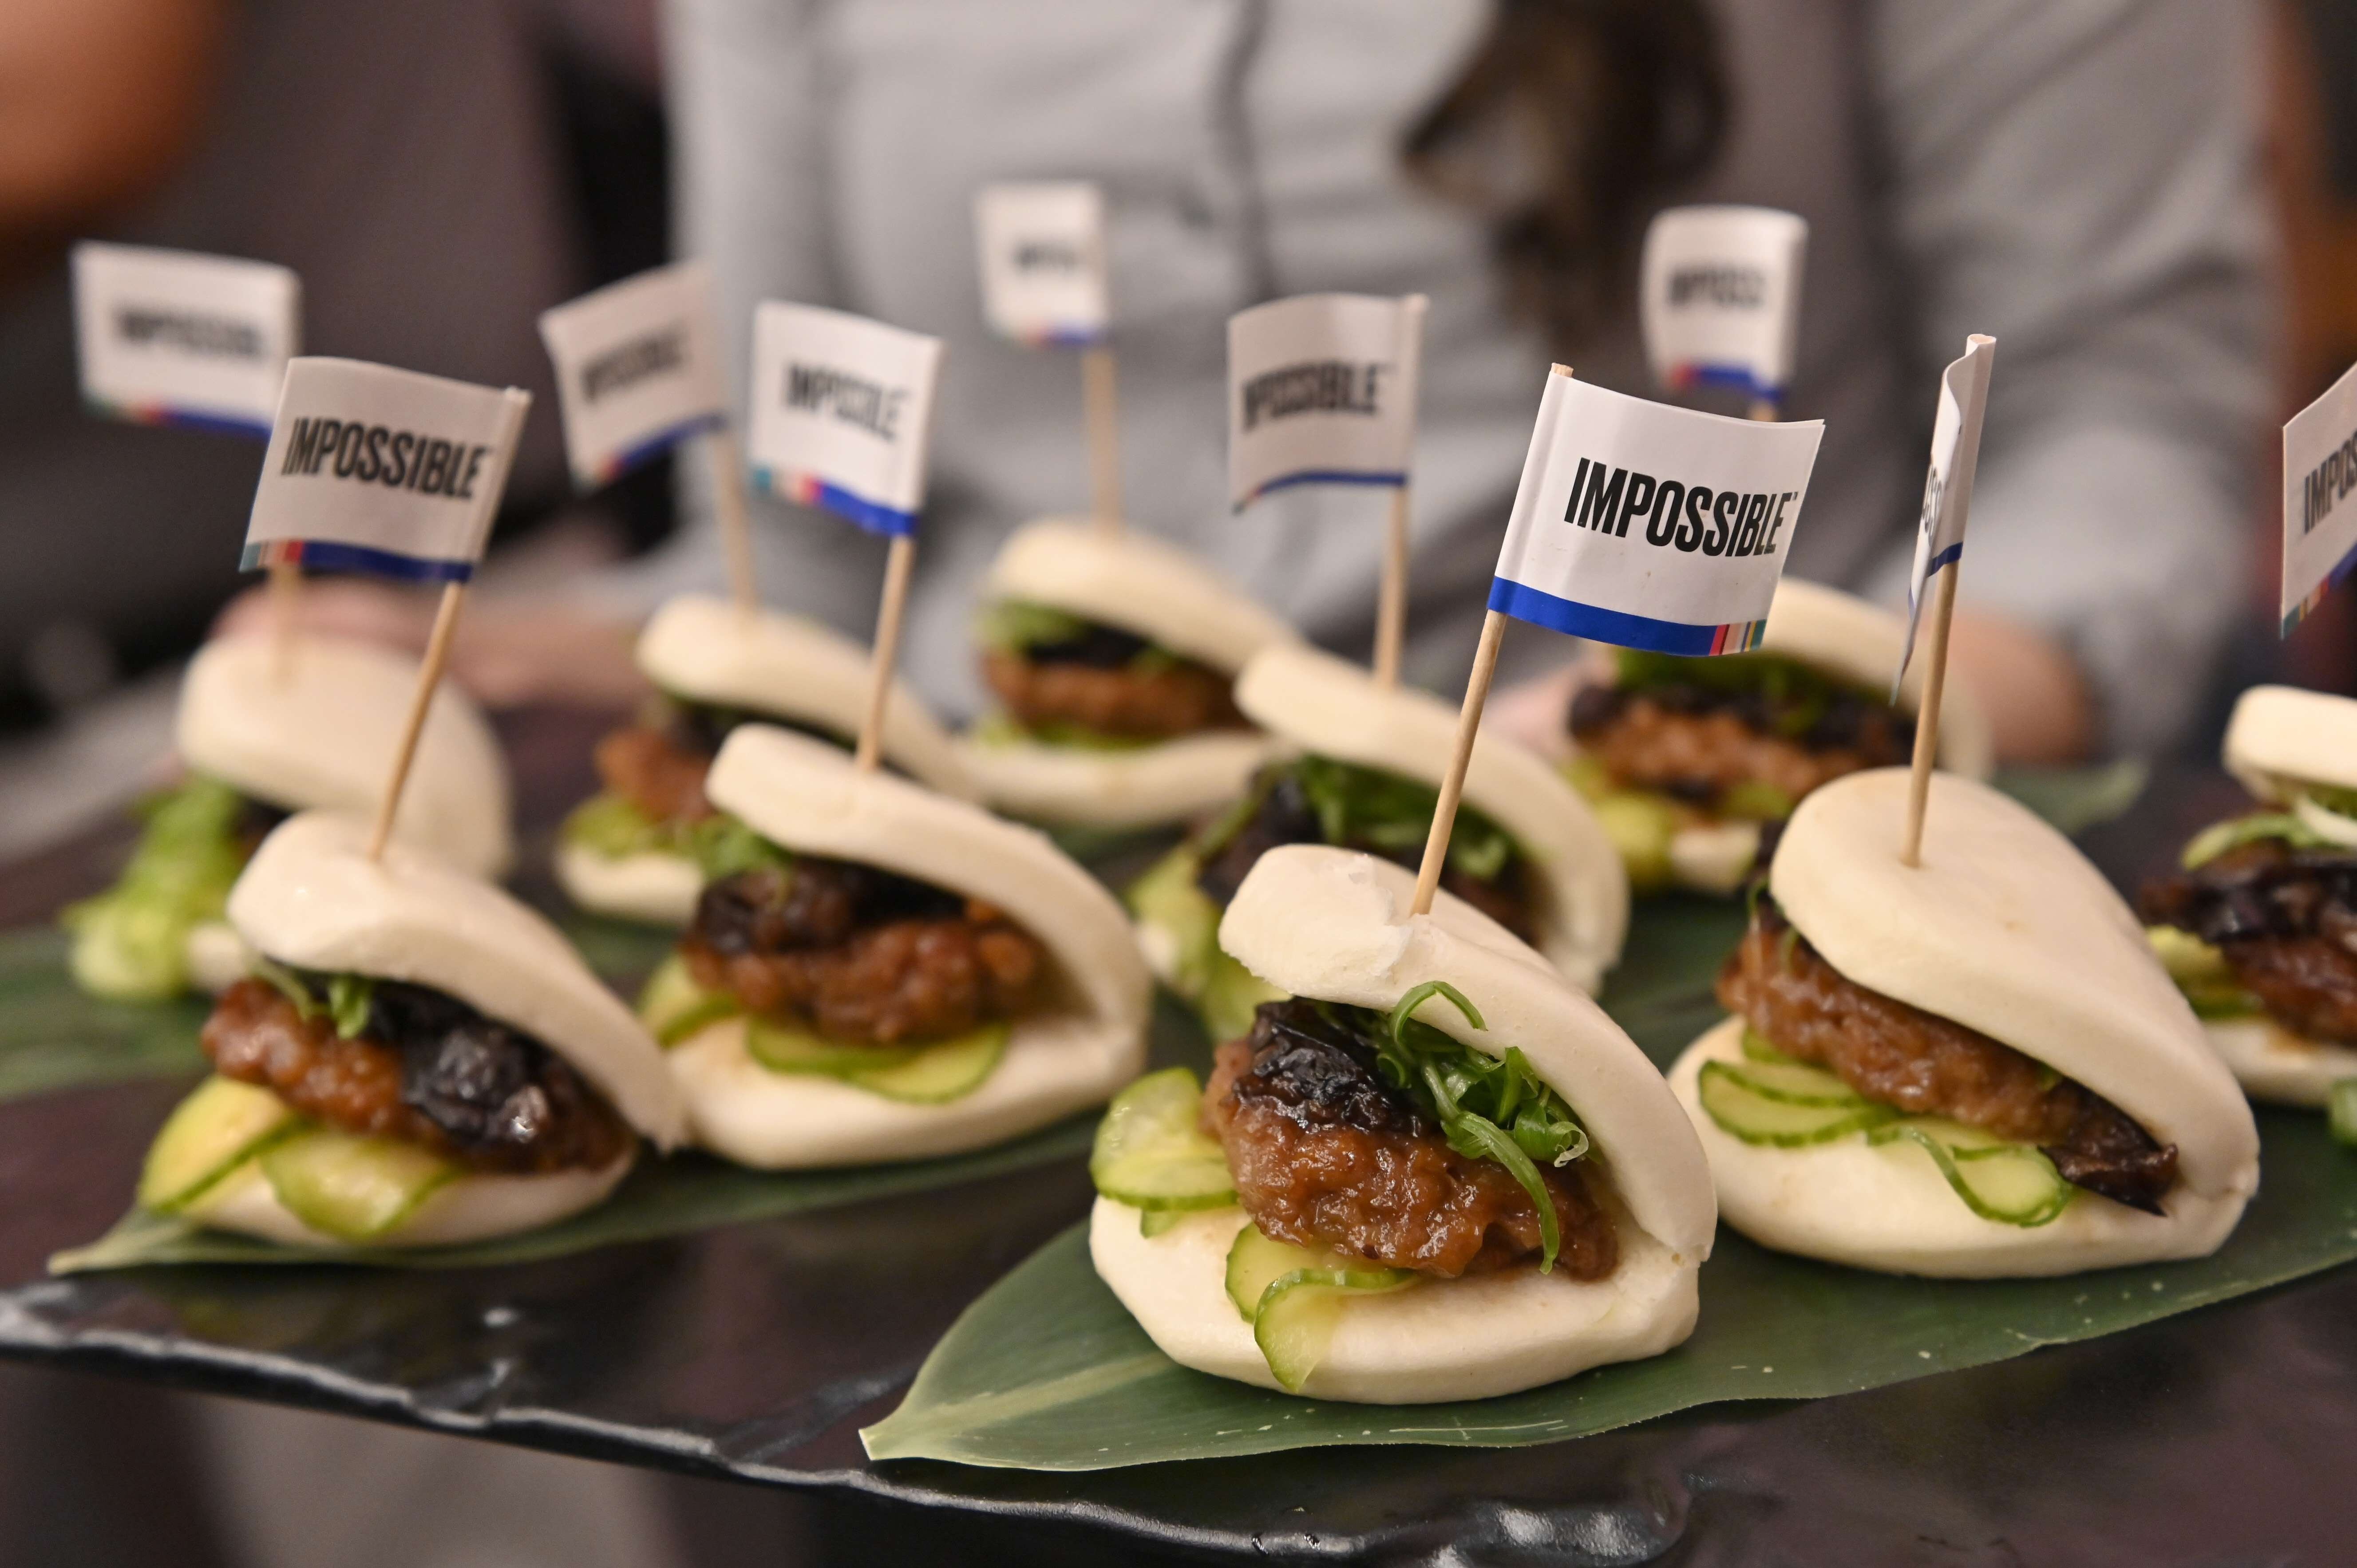 An Impossible Foods press event in Las Vegas, Nevada in January. Hong Kong tycoon Li Ka-shing is an early backer of the company, which has raised US$1.3 billion in total so far. Photo: AFP